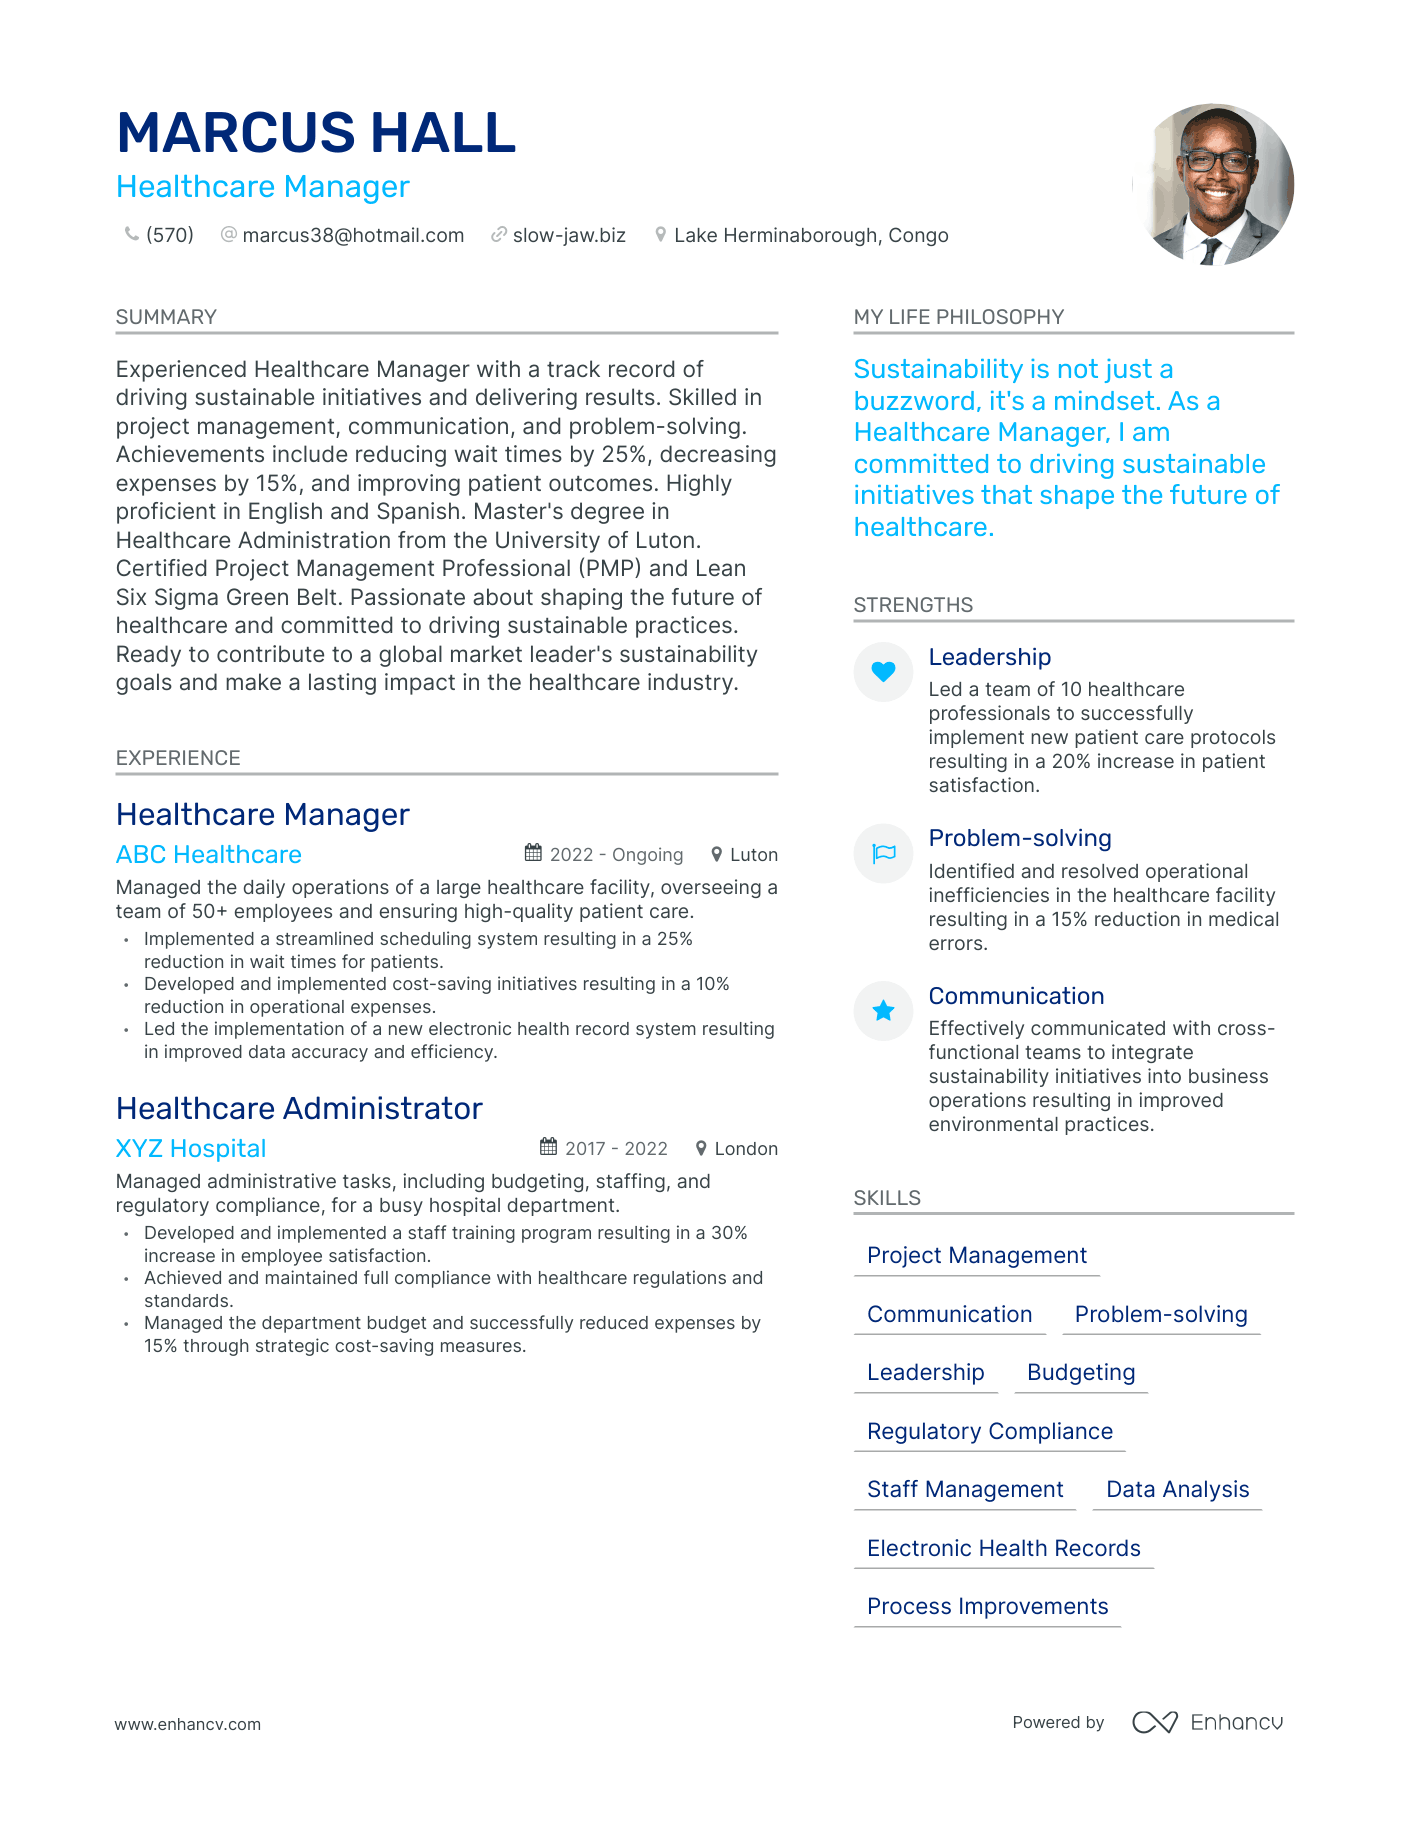 Healthcare Manager resume example